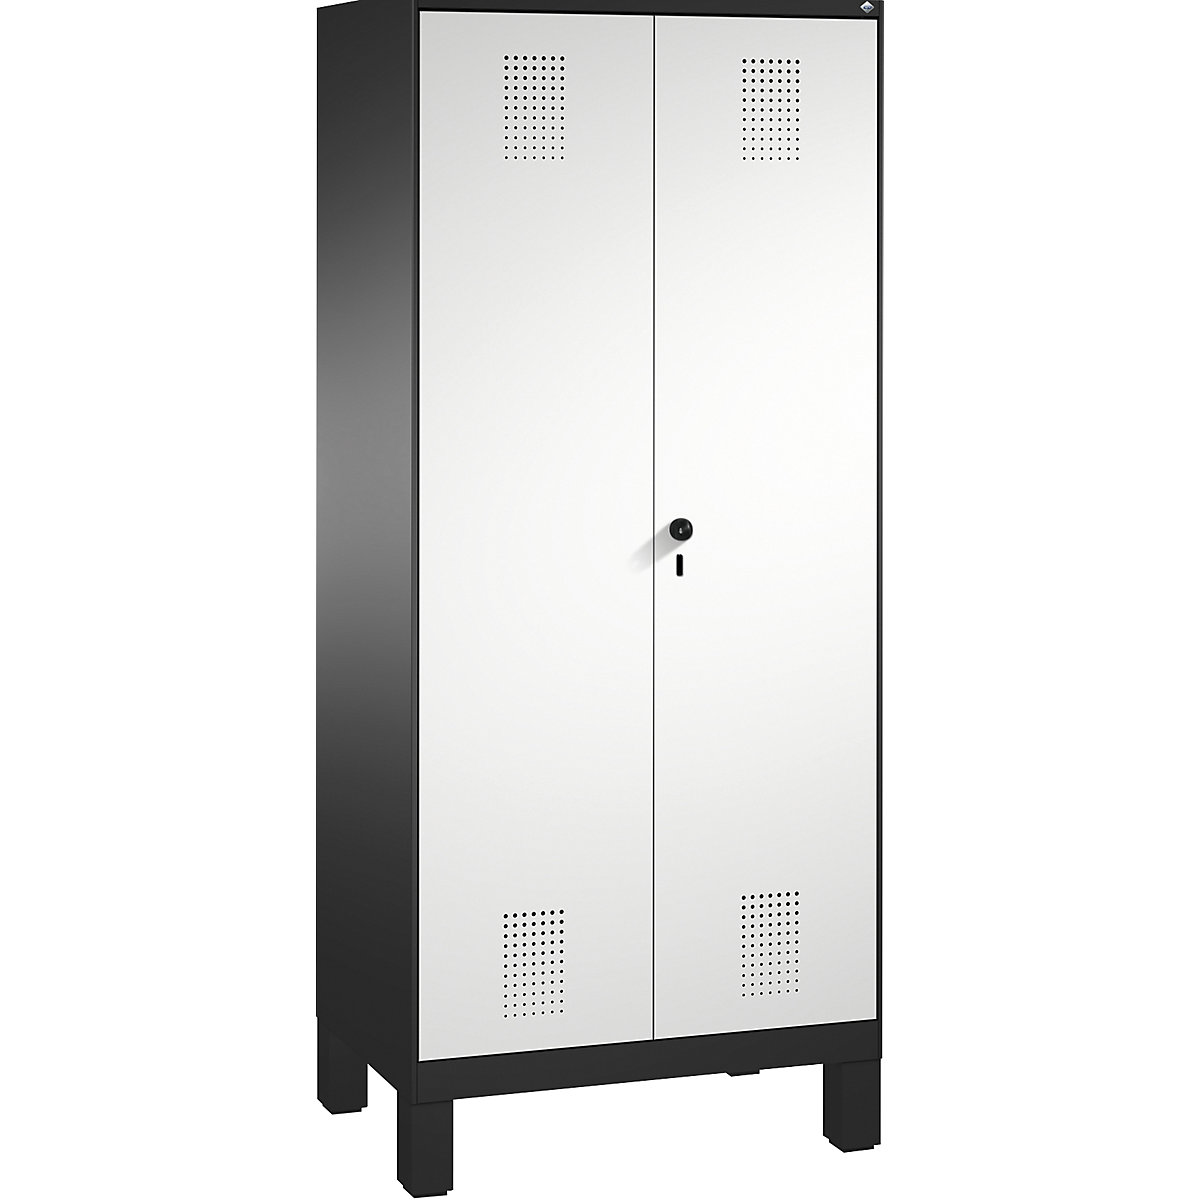 EVOLO cloakroom locker, doors close in the middle – C+P, 2 compartments, compartment width 400 mm, with feet, black grey / light grey-8